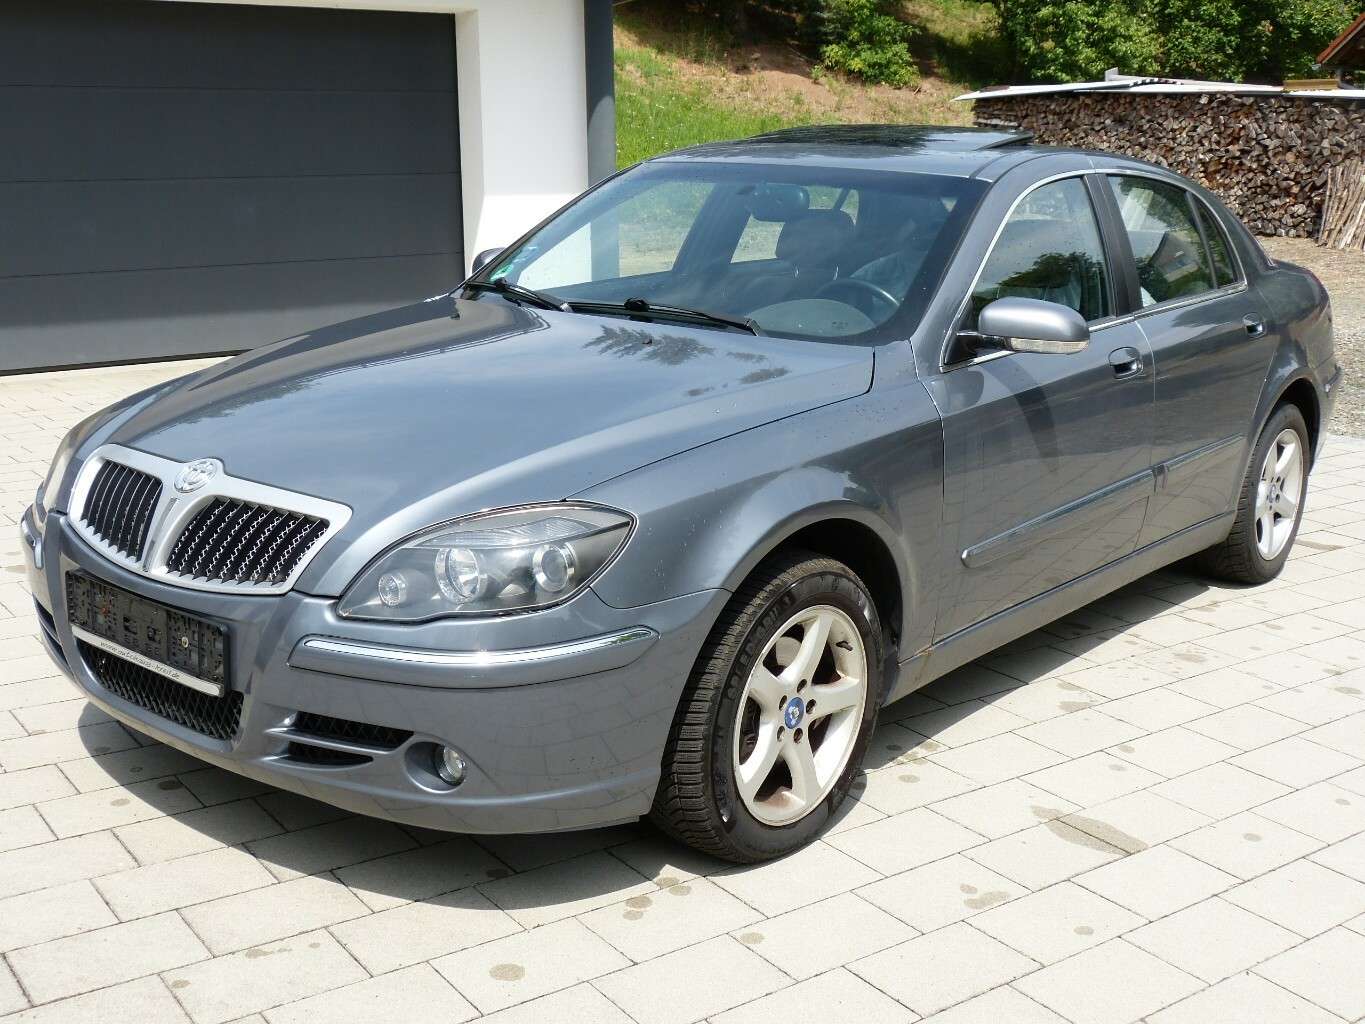 Brilliance BS4 Sedan in Grey used in Oberviechtach for € 1,599.-